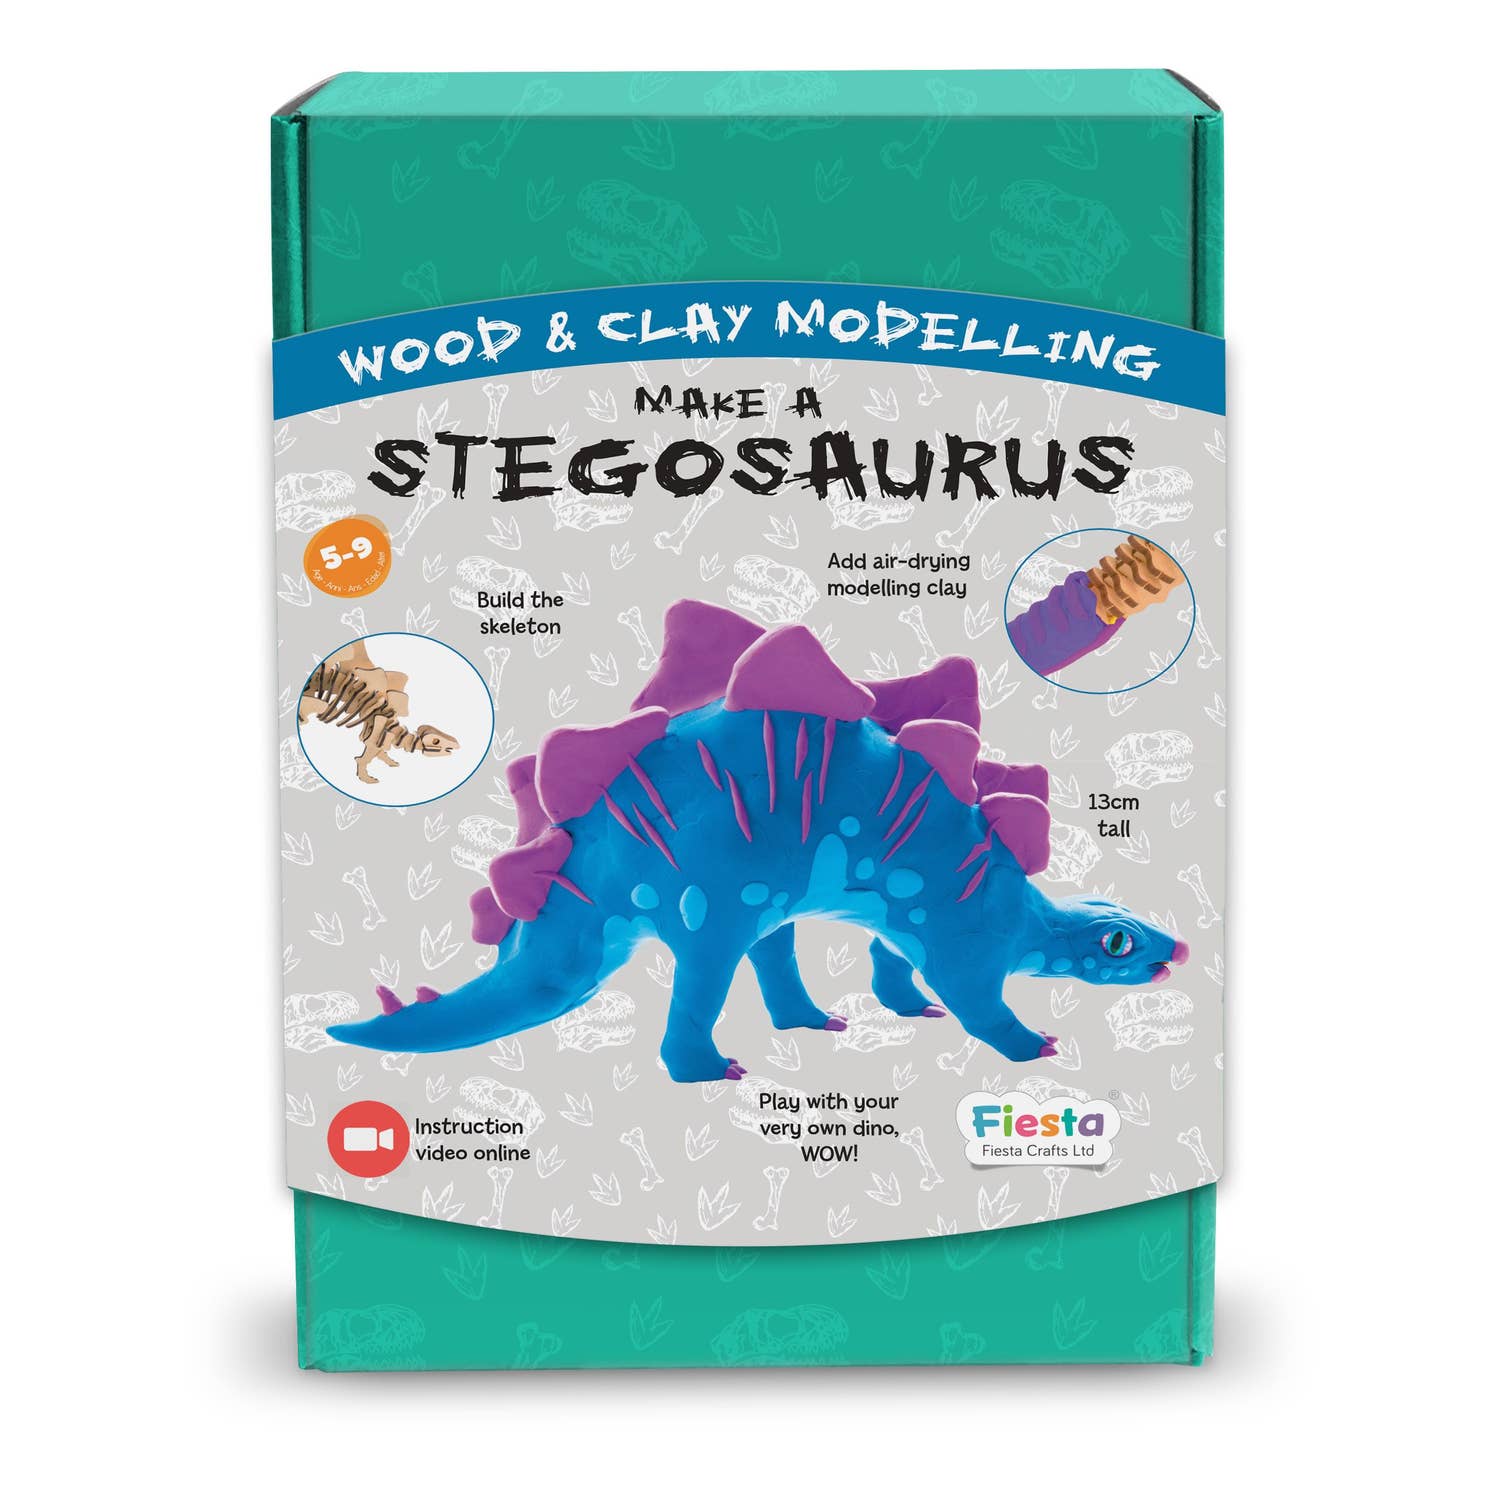 Kids' Gifts for Boys and Girls: Make-A-Dinosaur - Stegosaurus Wood and Clay Kit